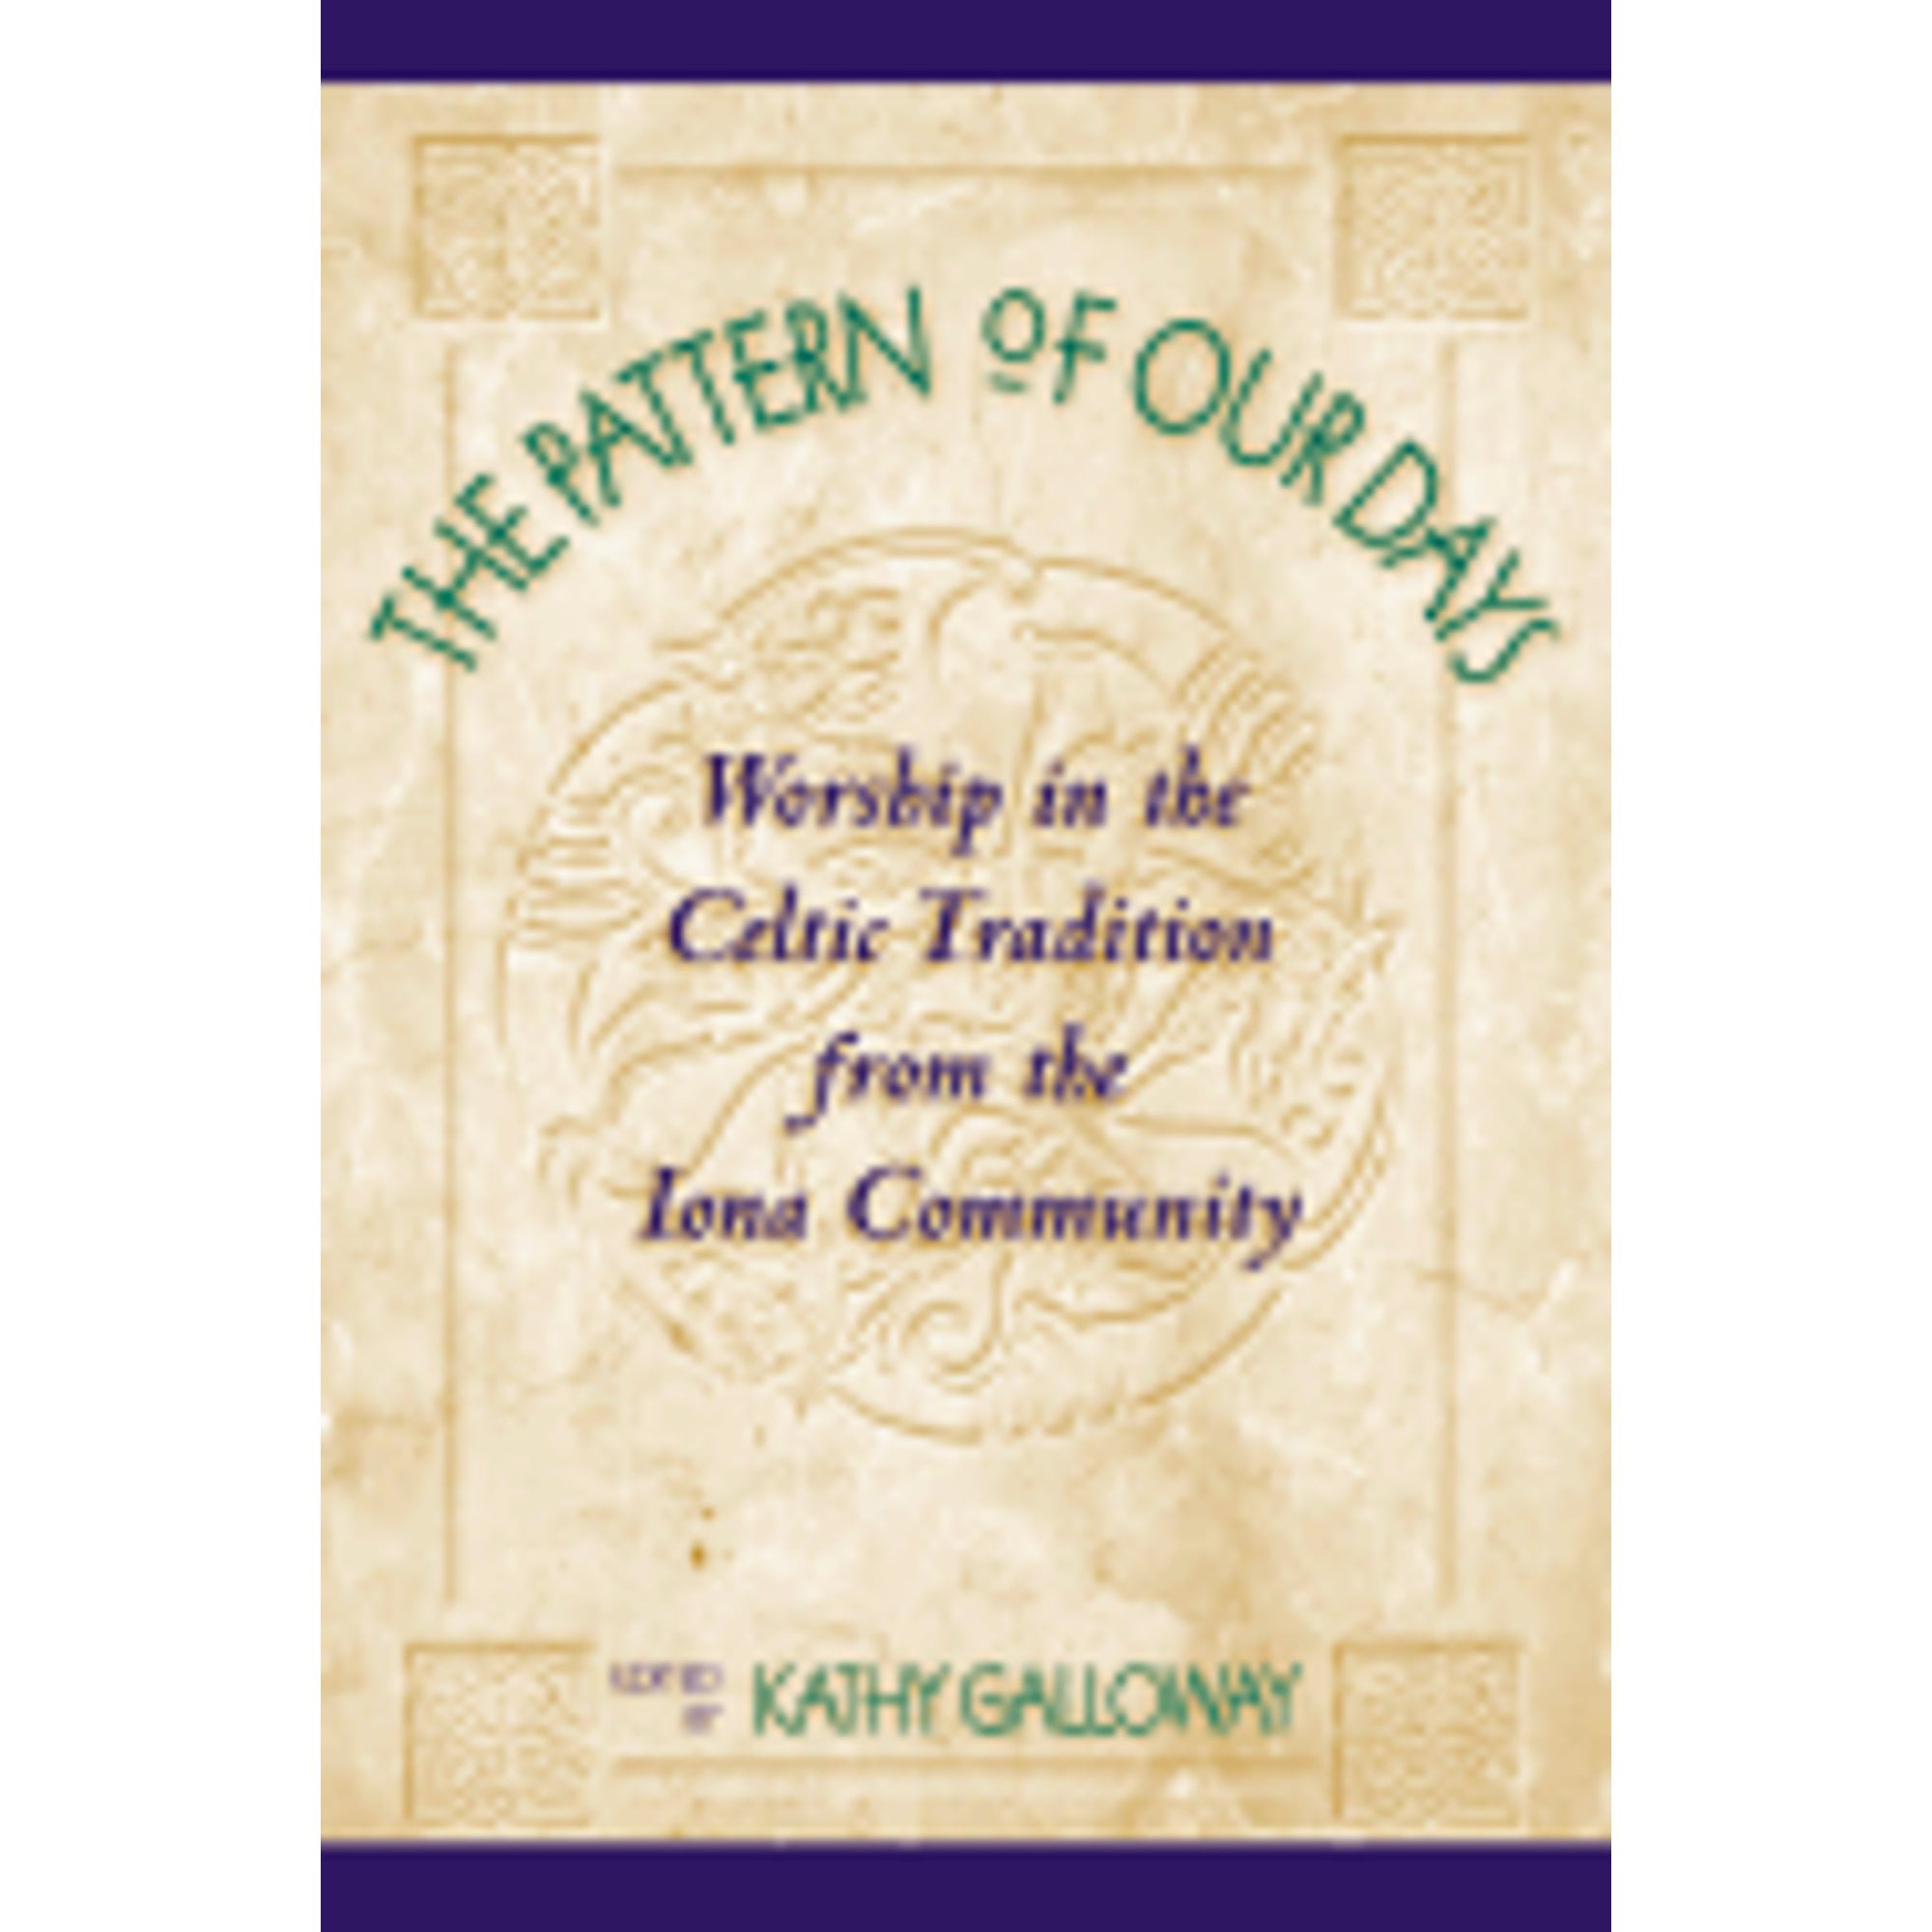 Pre-Owned The Pattern of Our Days: Worship in the Celtic Tradition from the Iona Community (Paperback 9780809138609) by The Iona Community, Kathy Galloway